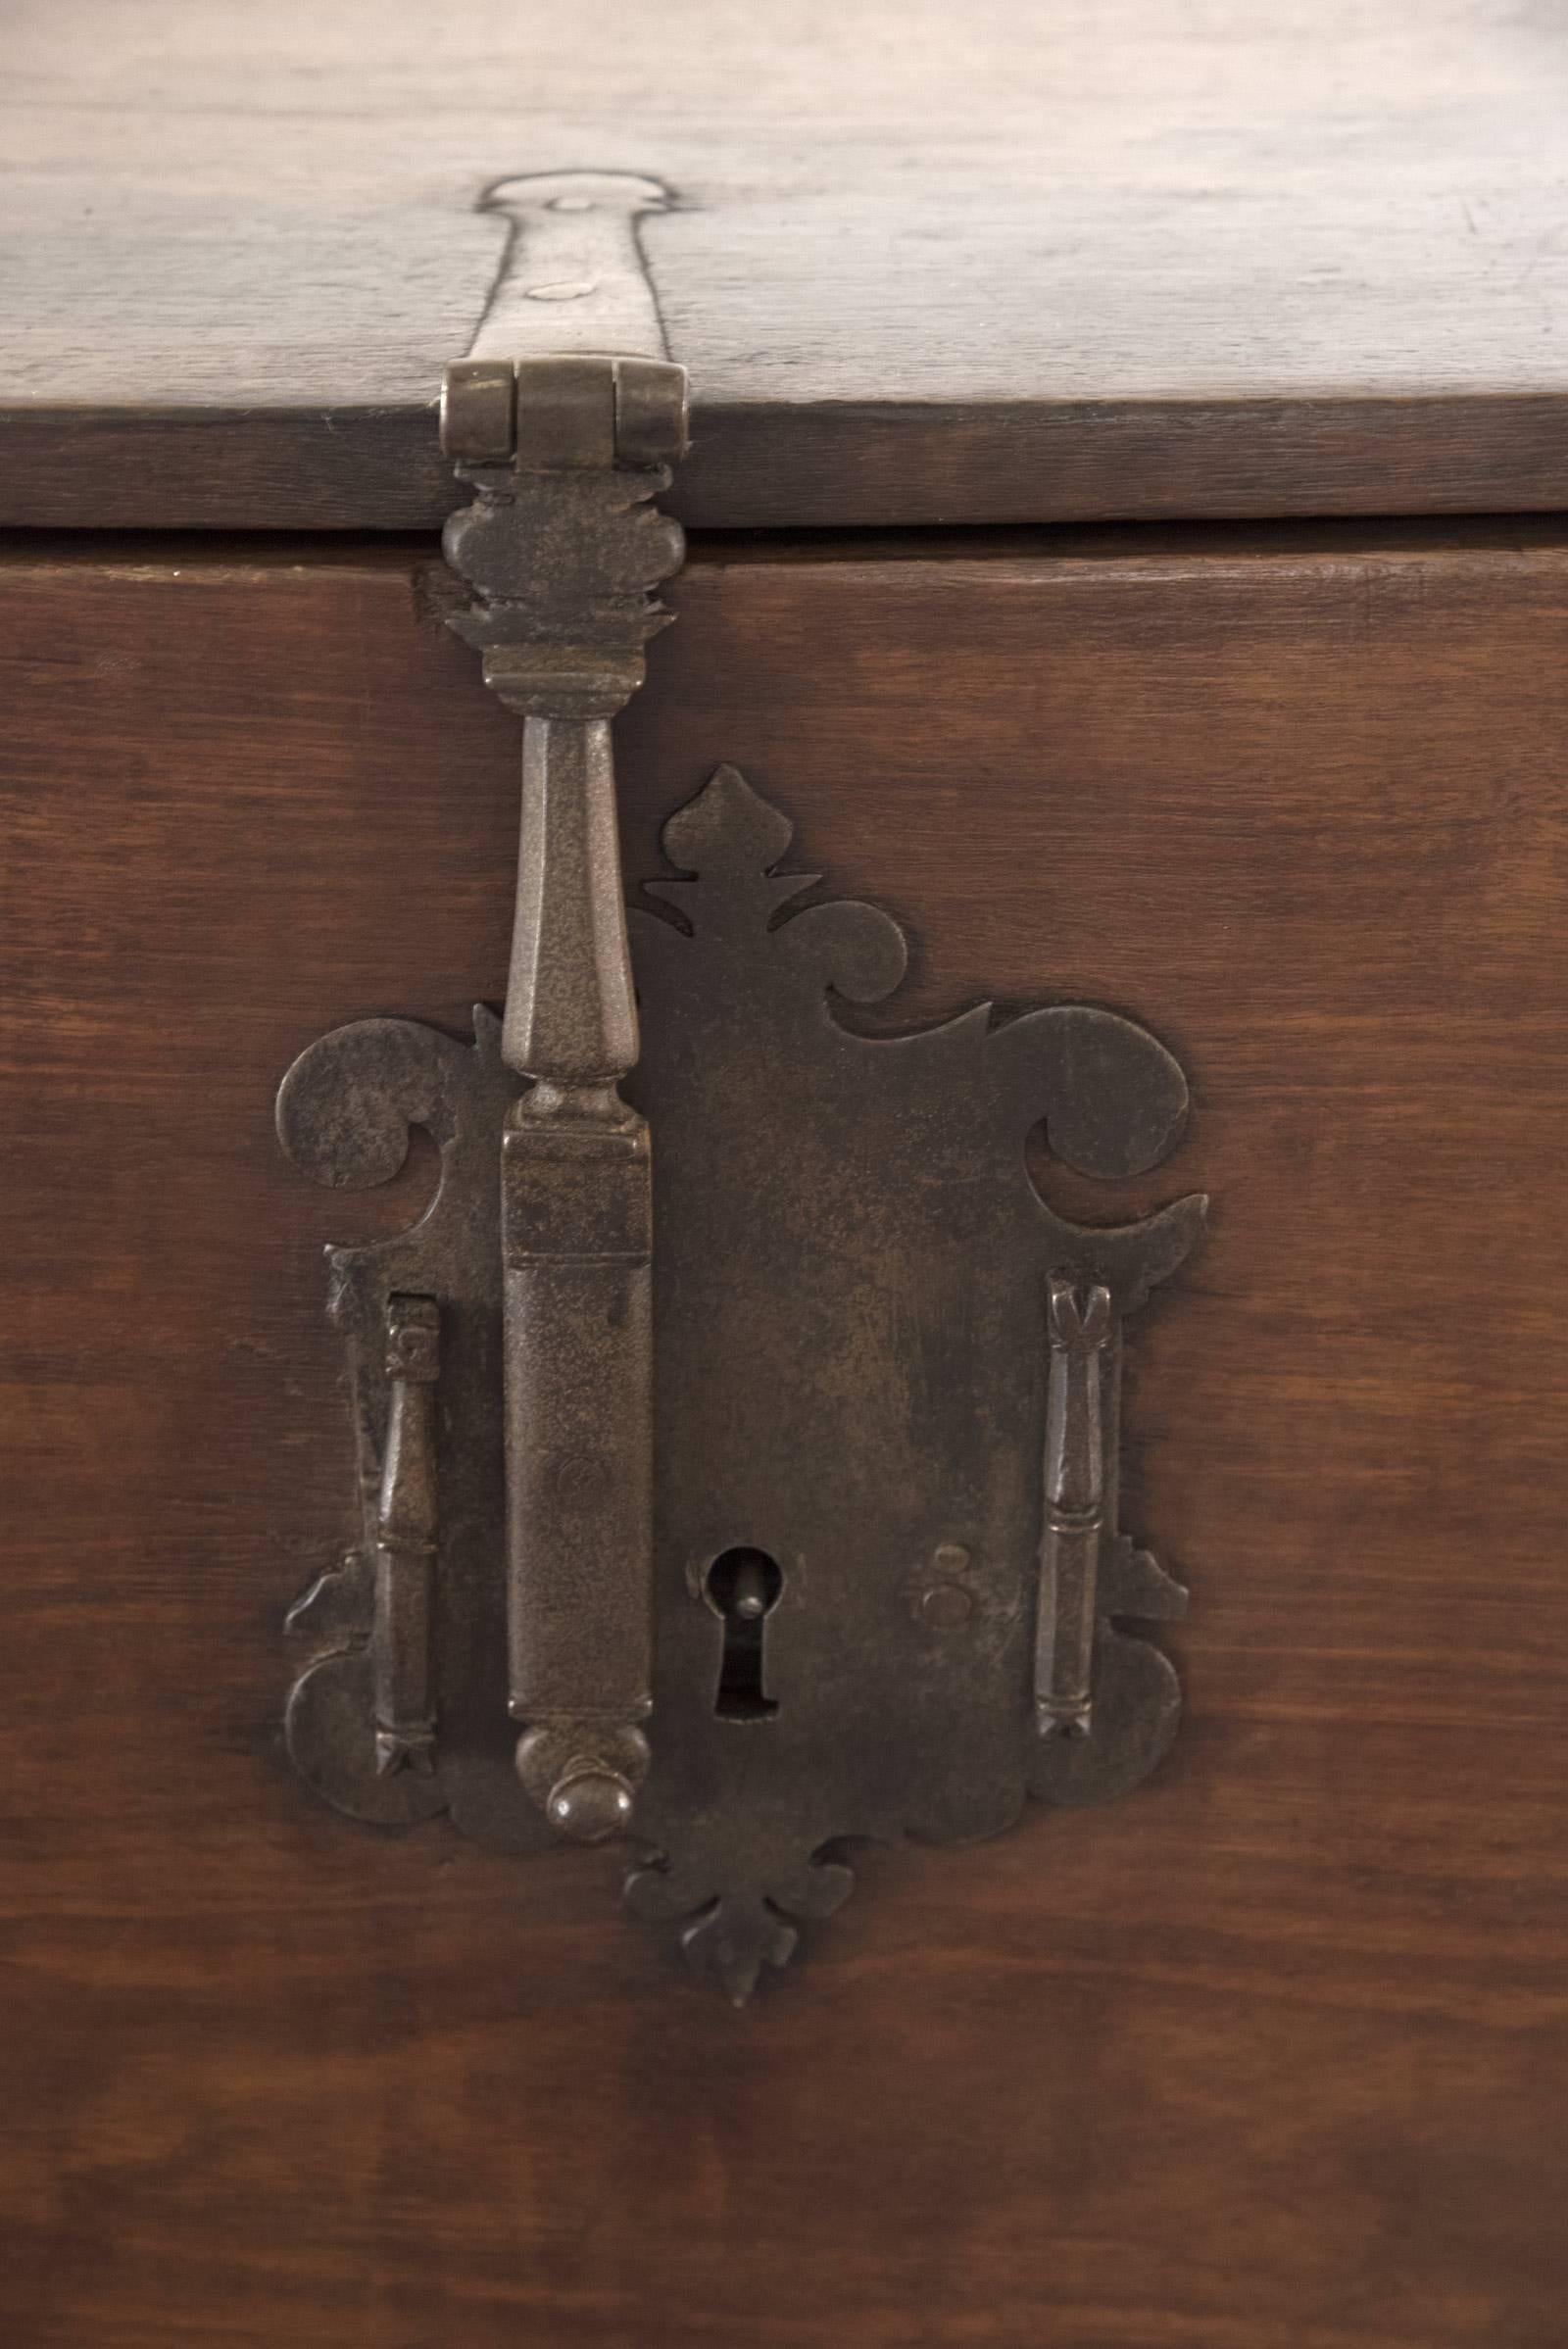 A two-piece, 19th century Spanish vargueno, or portable desk, made of walnut with mounted brass brackets, two tracery pulls and shaped escutcheon, with two brass handles on either end of box for transportation. The drop front opens to an interior